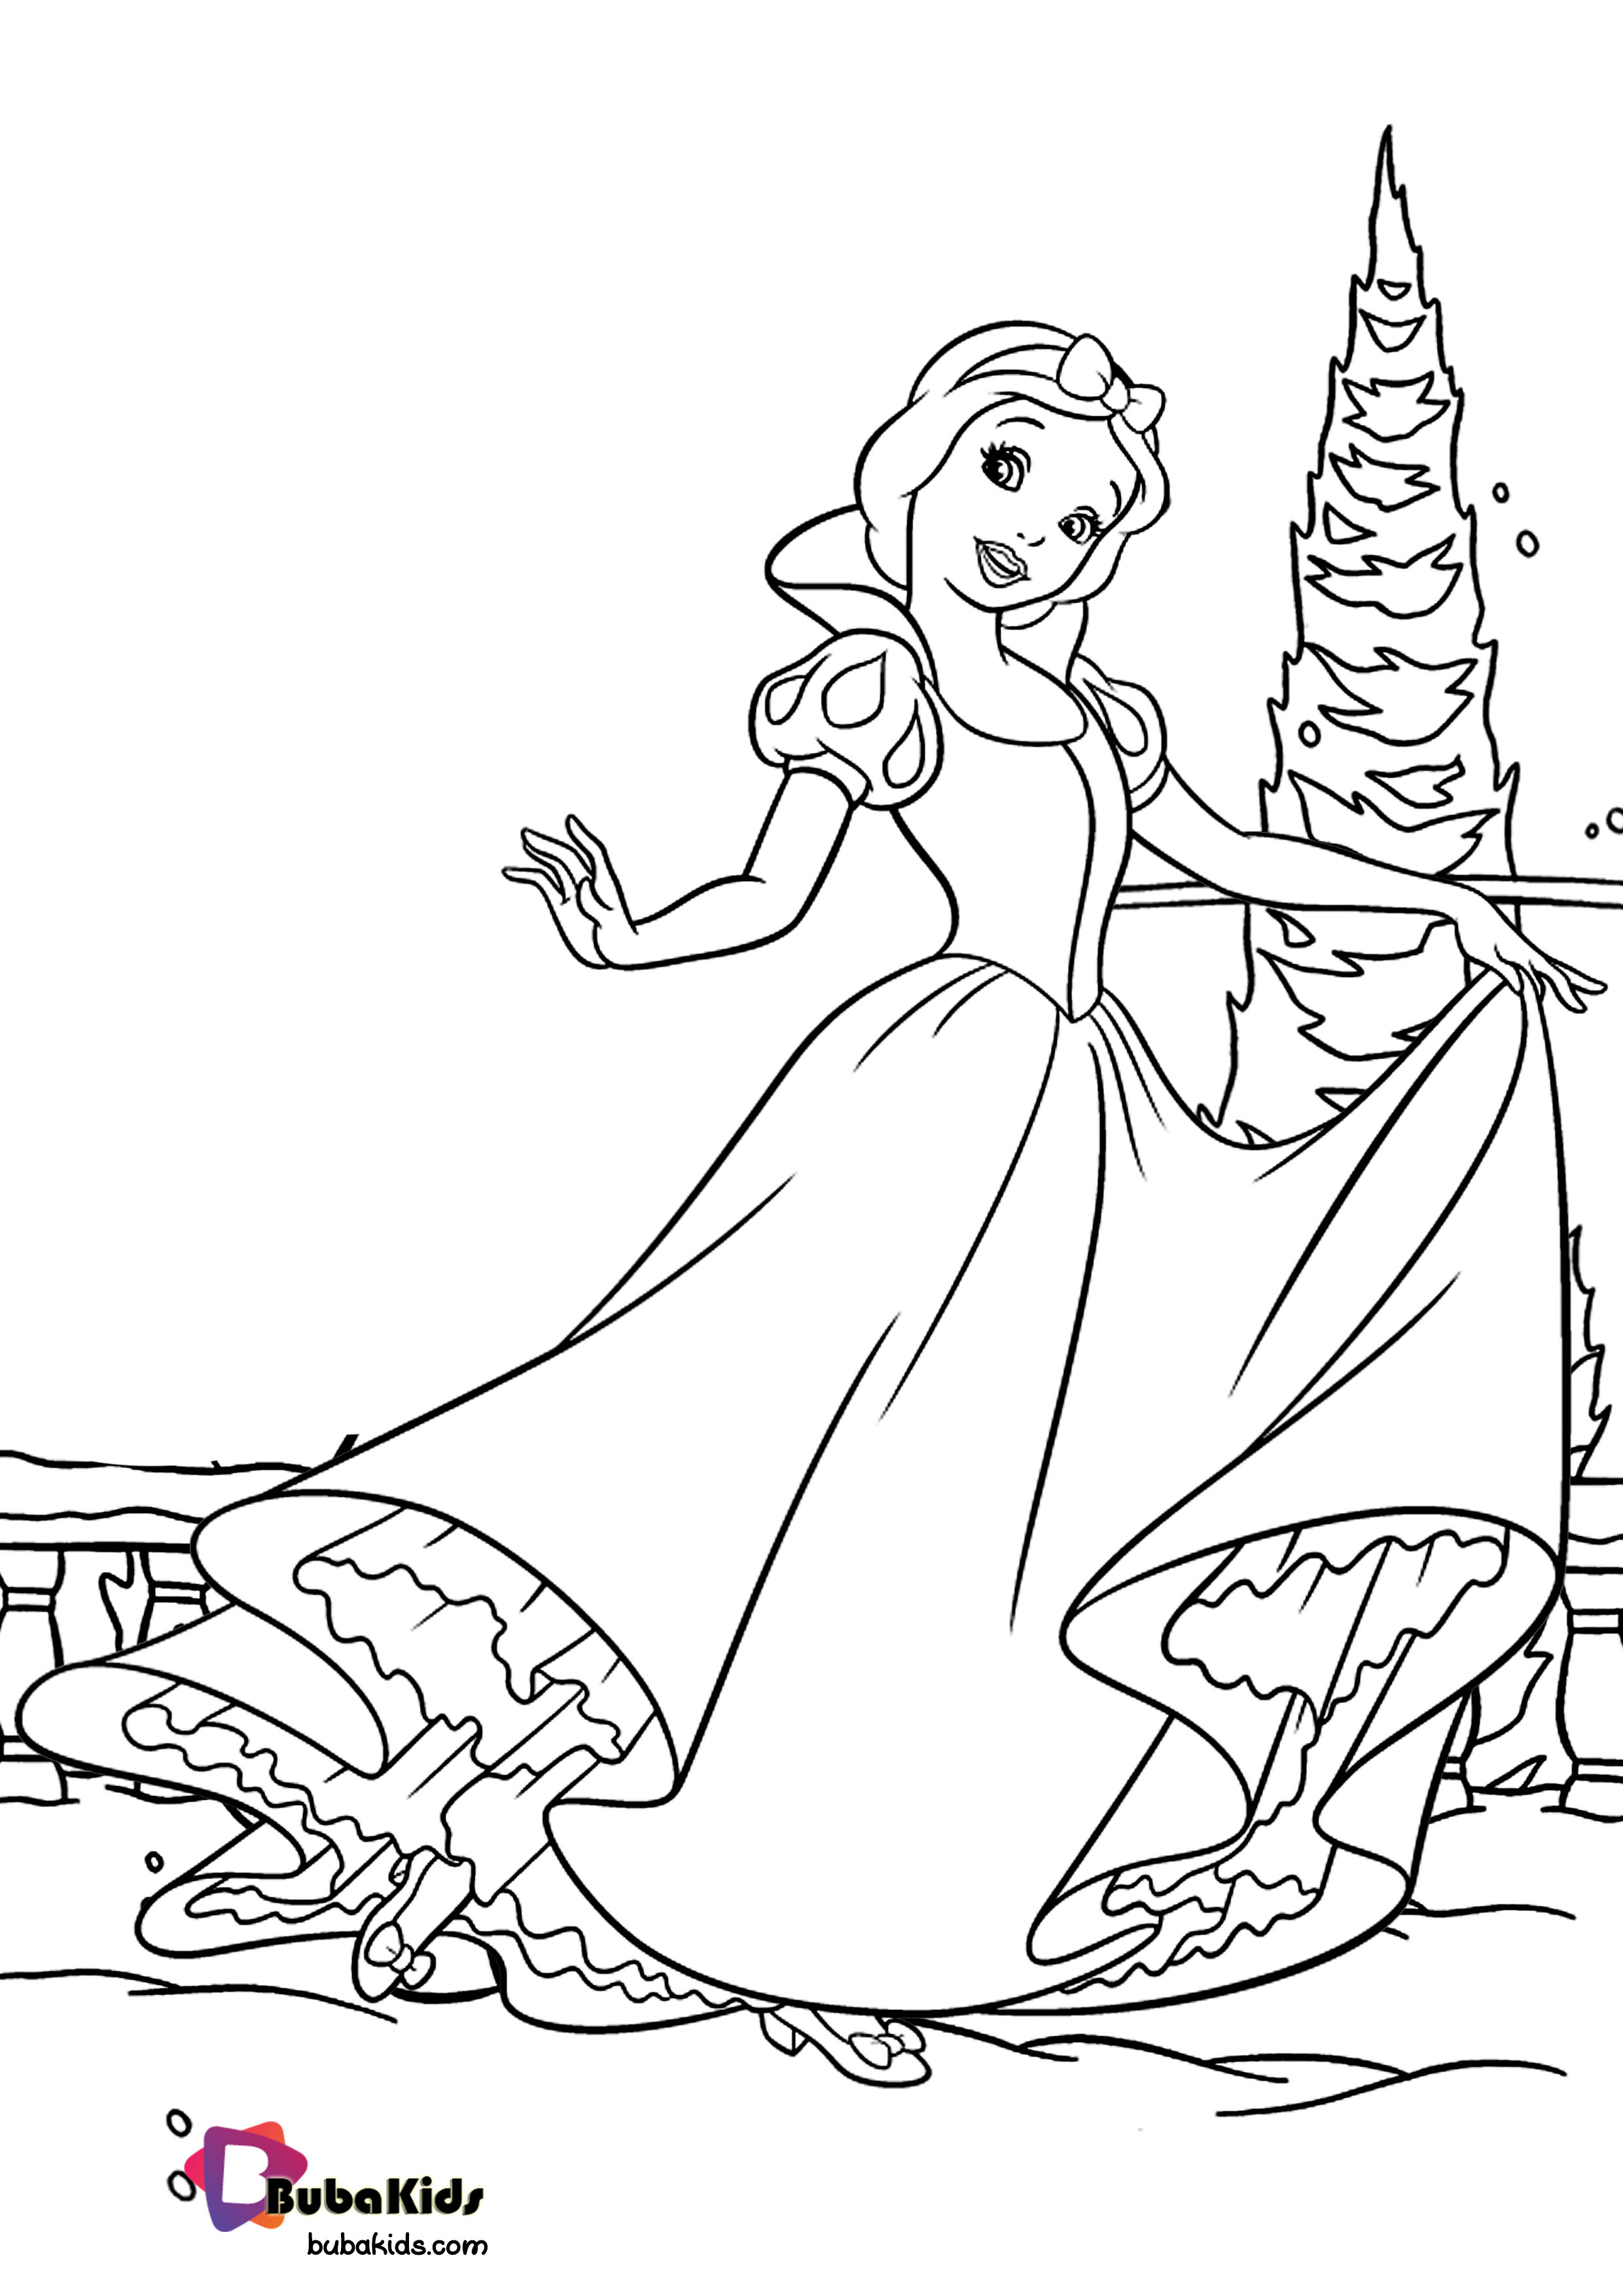 Dancing Snow White Coloring Page Wallpaper